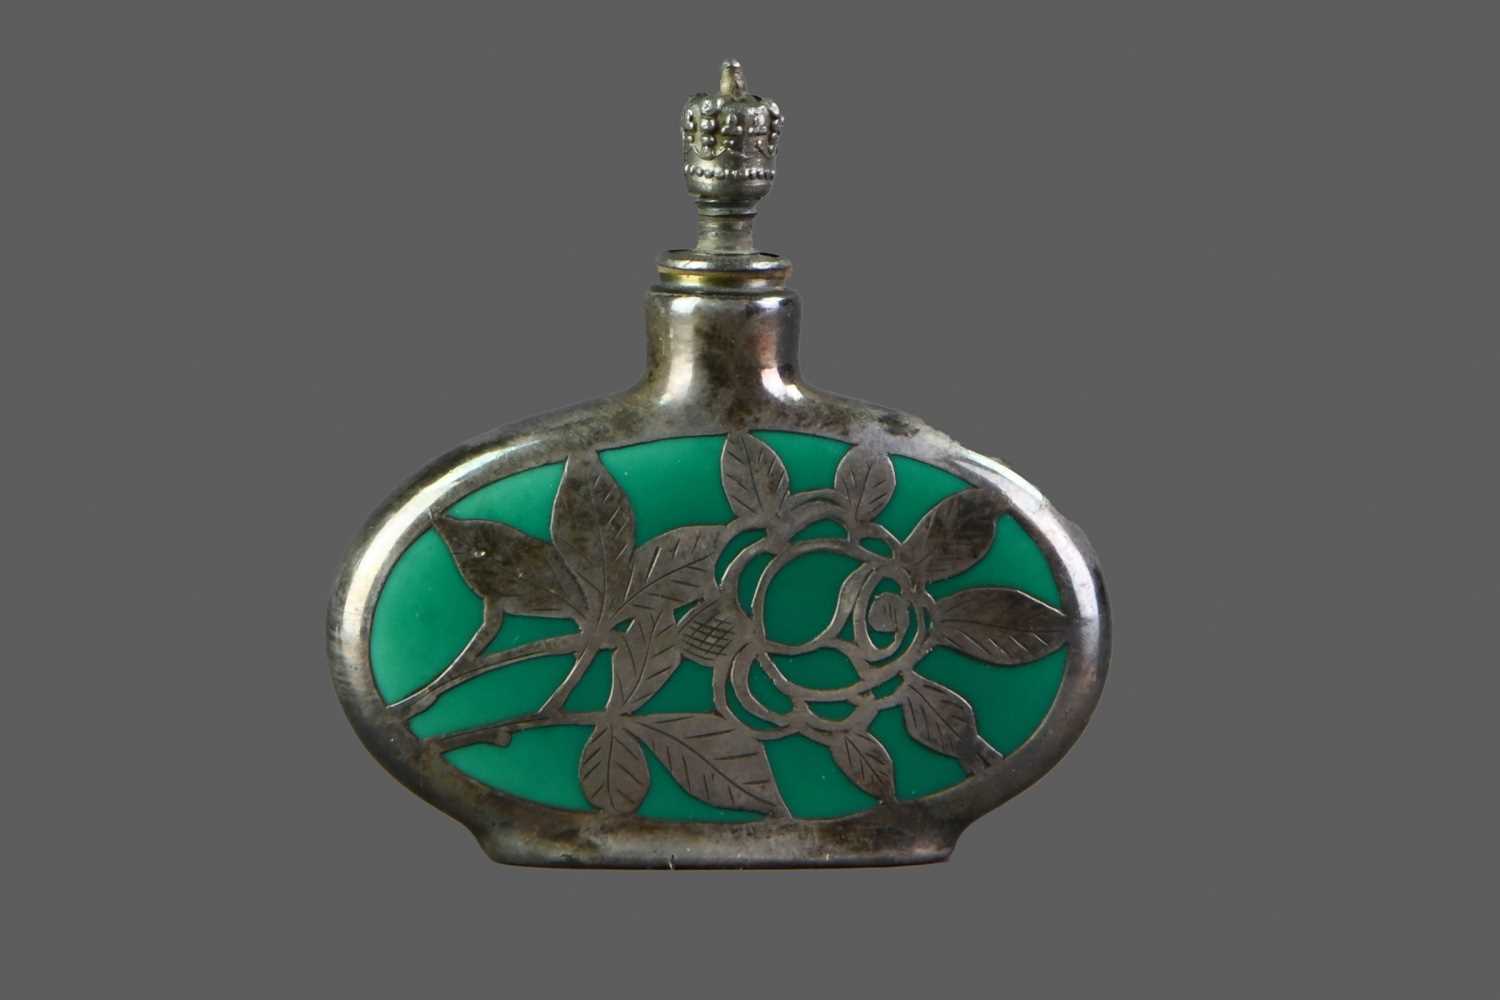 Lot 53 - AN EARLY 20TH CENTURY SILVER OVERLAID GREEN HARDSTONE SCENT BOTTLE